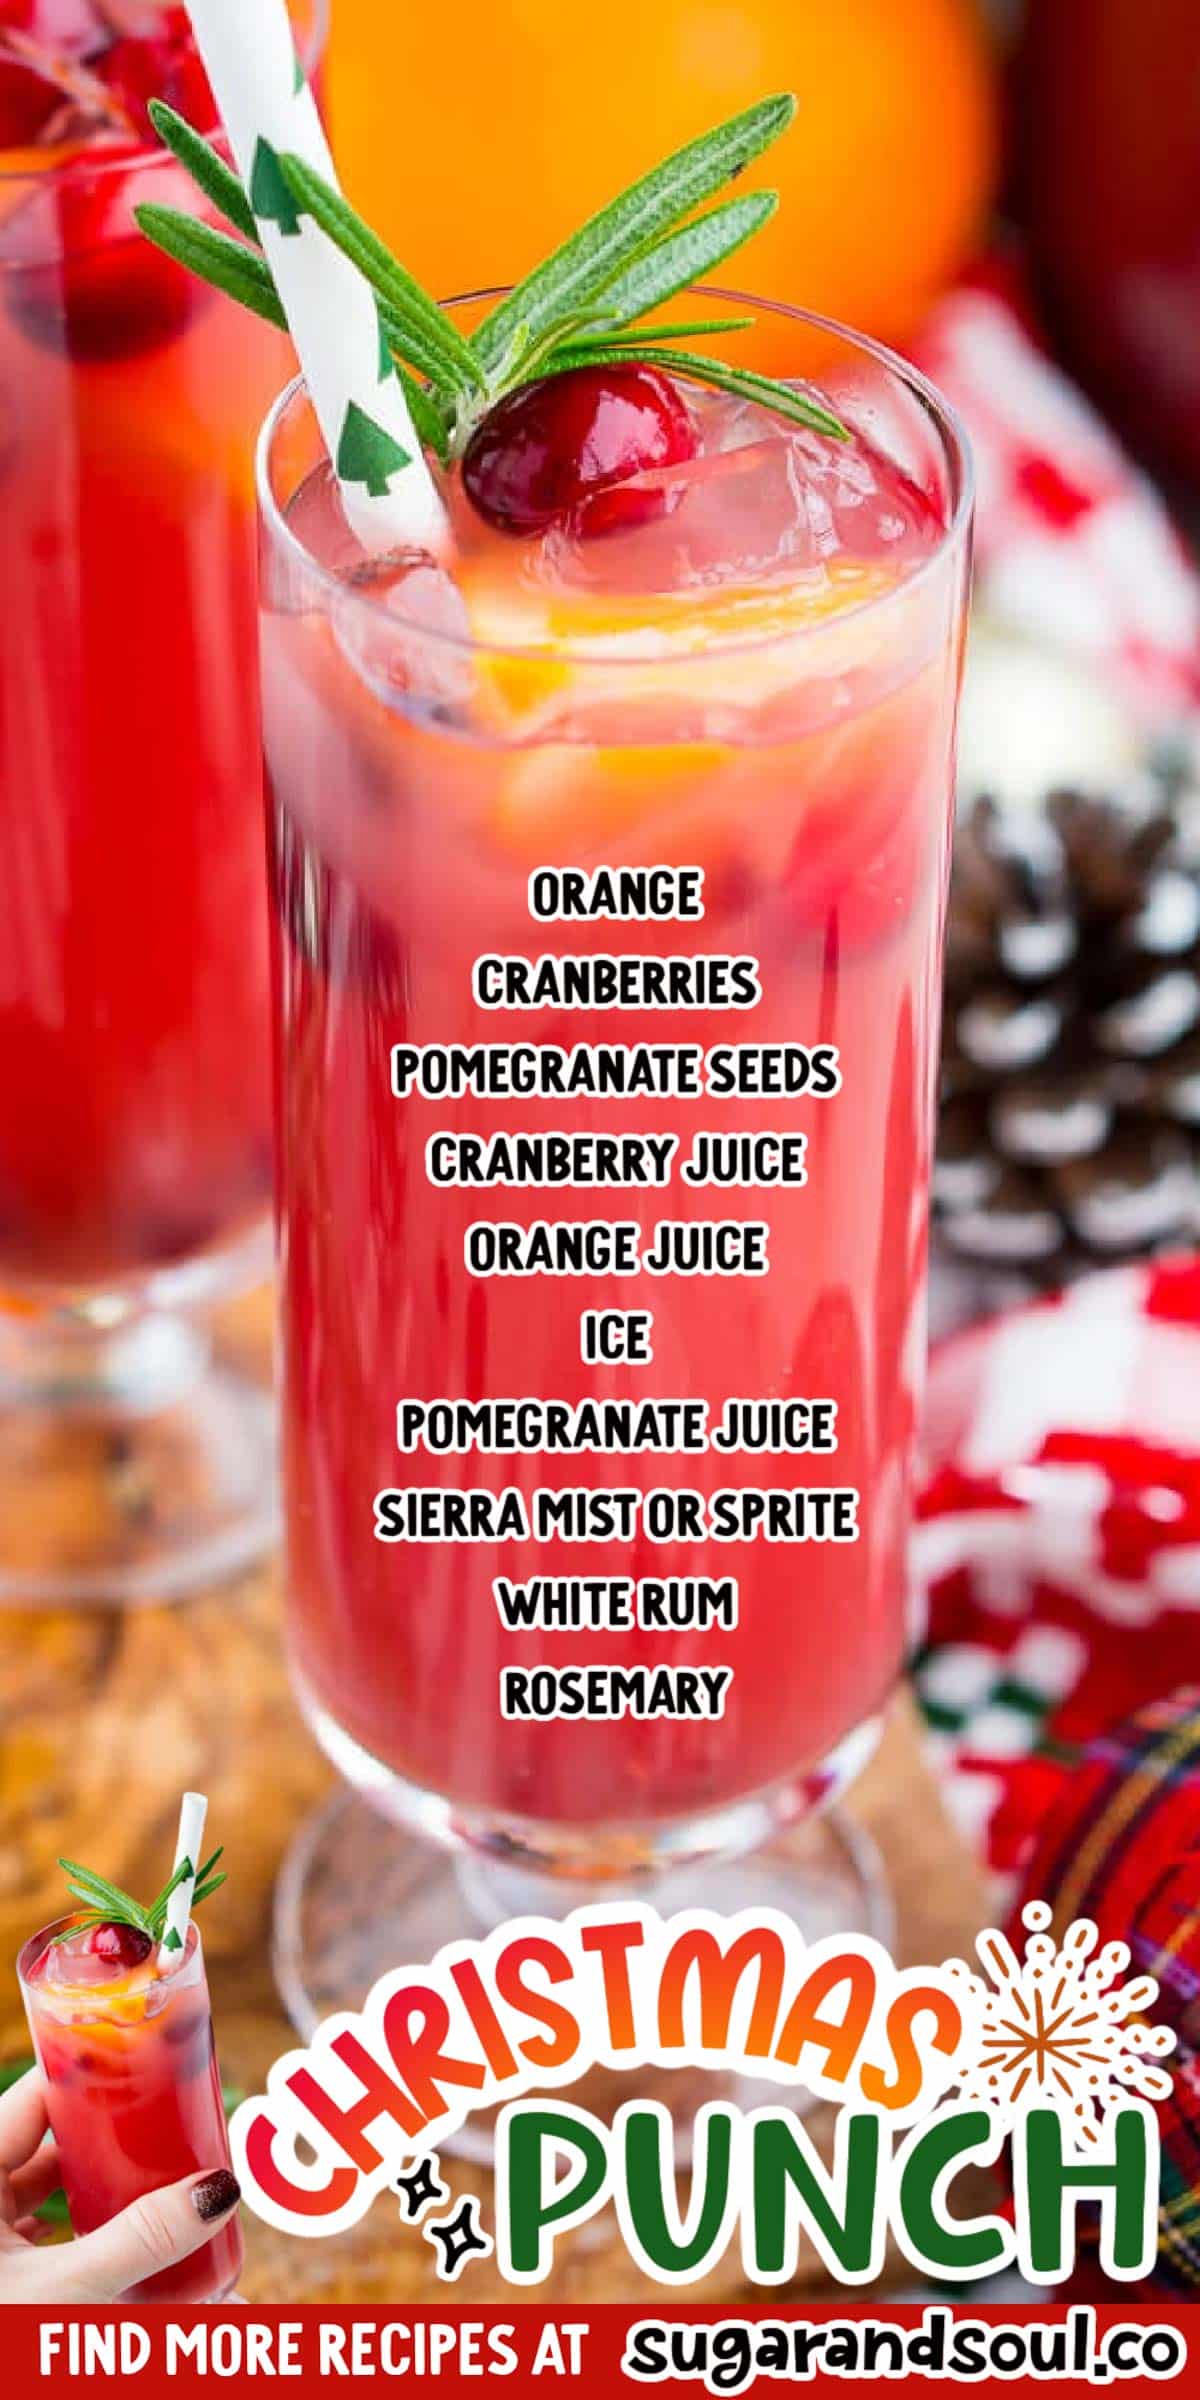 Christmas Punch is an easy and delicious holiday party drink packed with fruits like cranberries, oranges, and pomegranates. Keep it non-alcoholic, or add rum or vodka for extra holiday spirit! via @sugarandsoulco